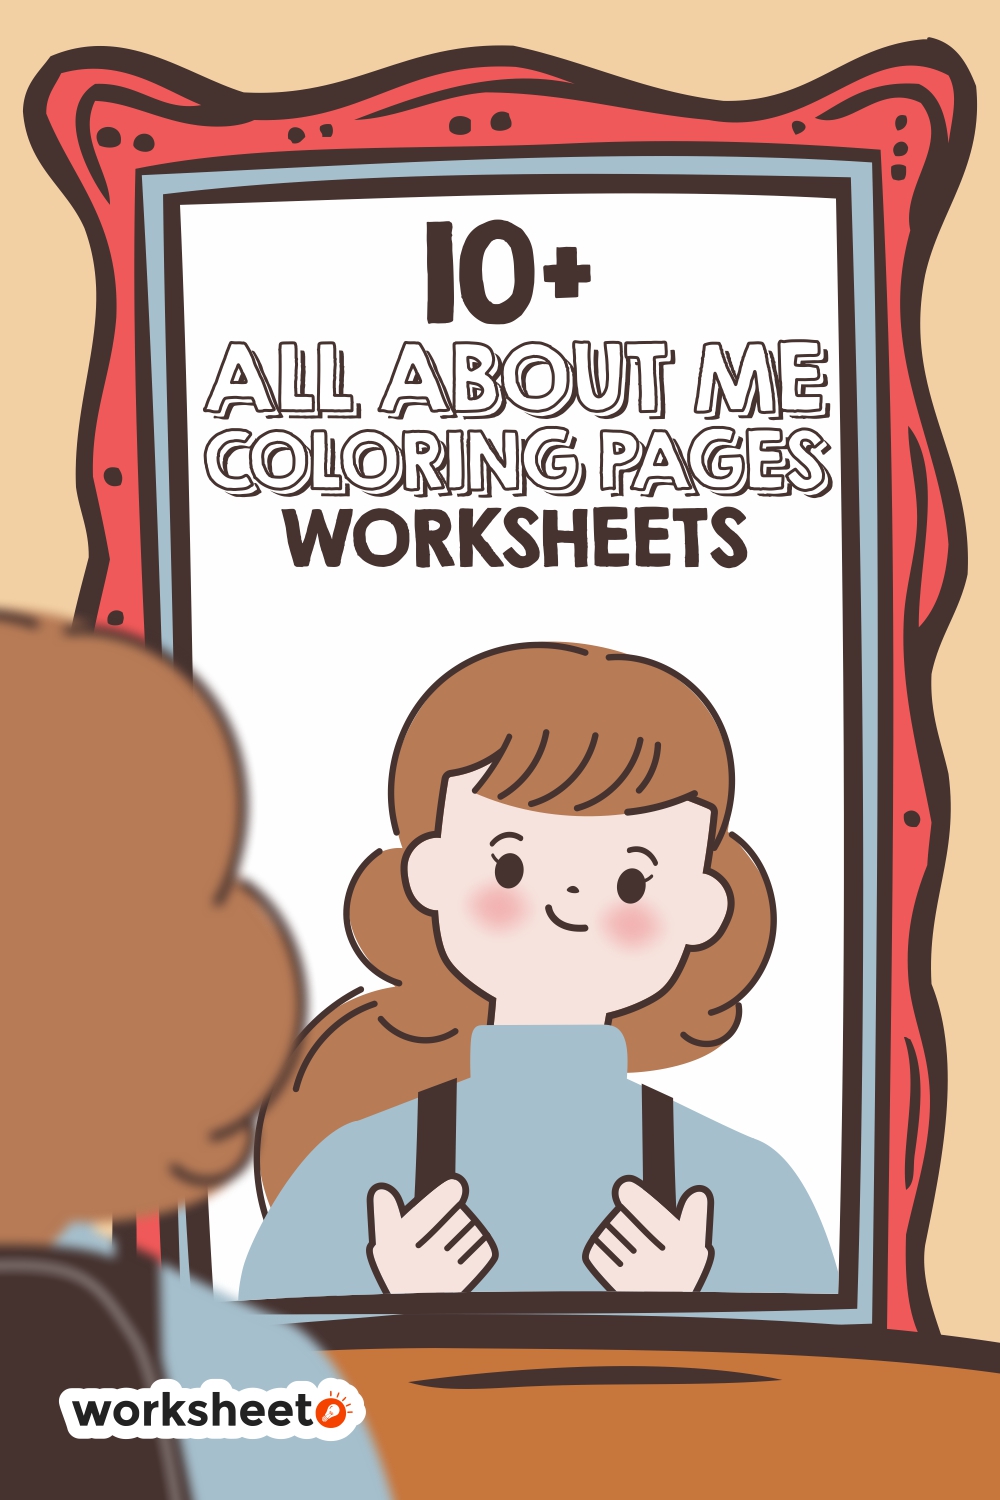 All About Me Coloring Pages Worksheets